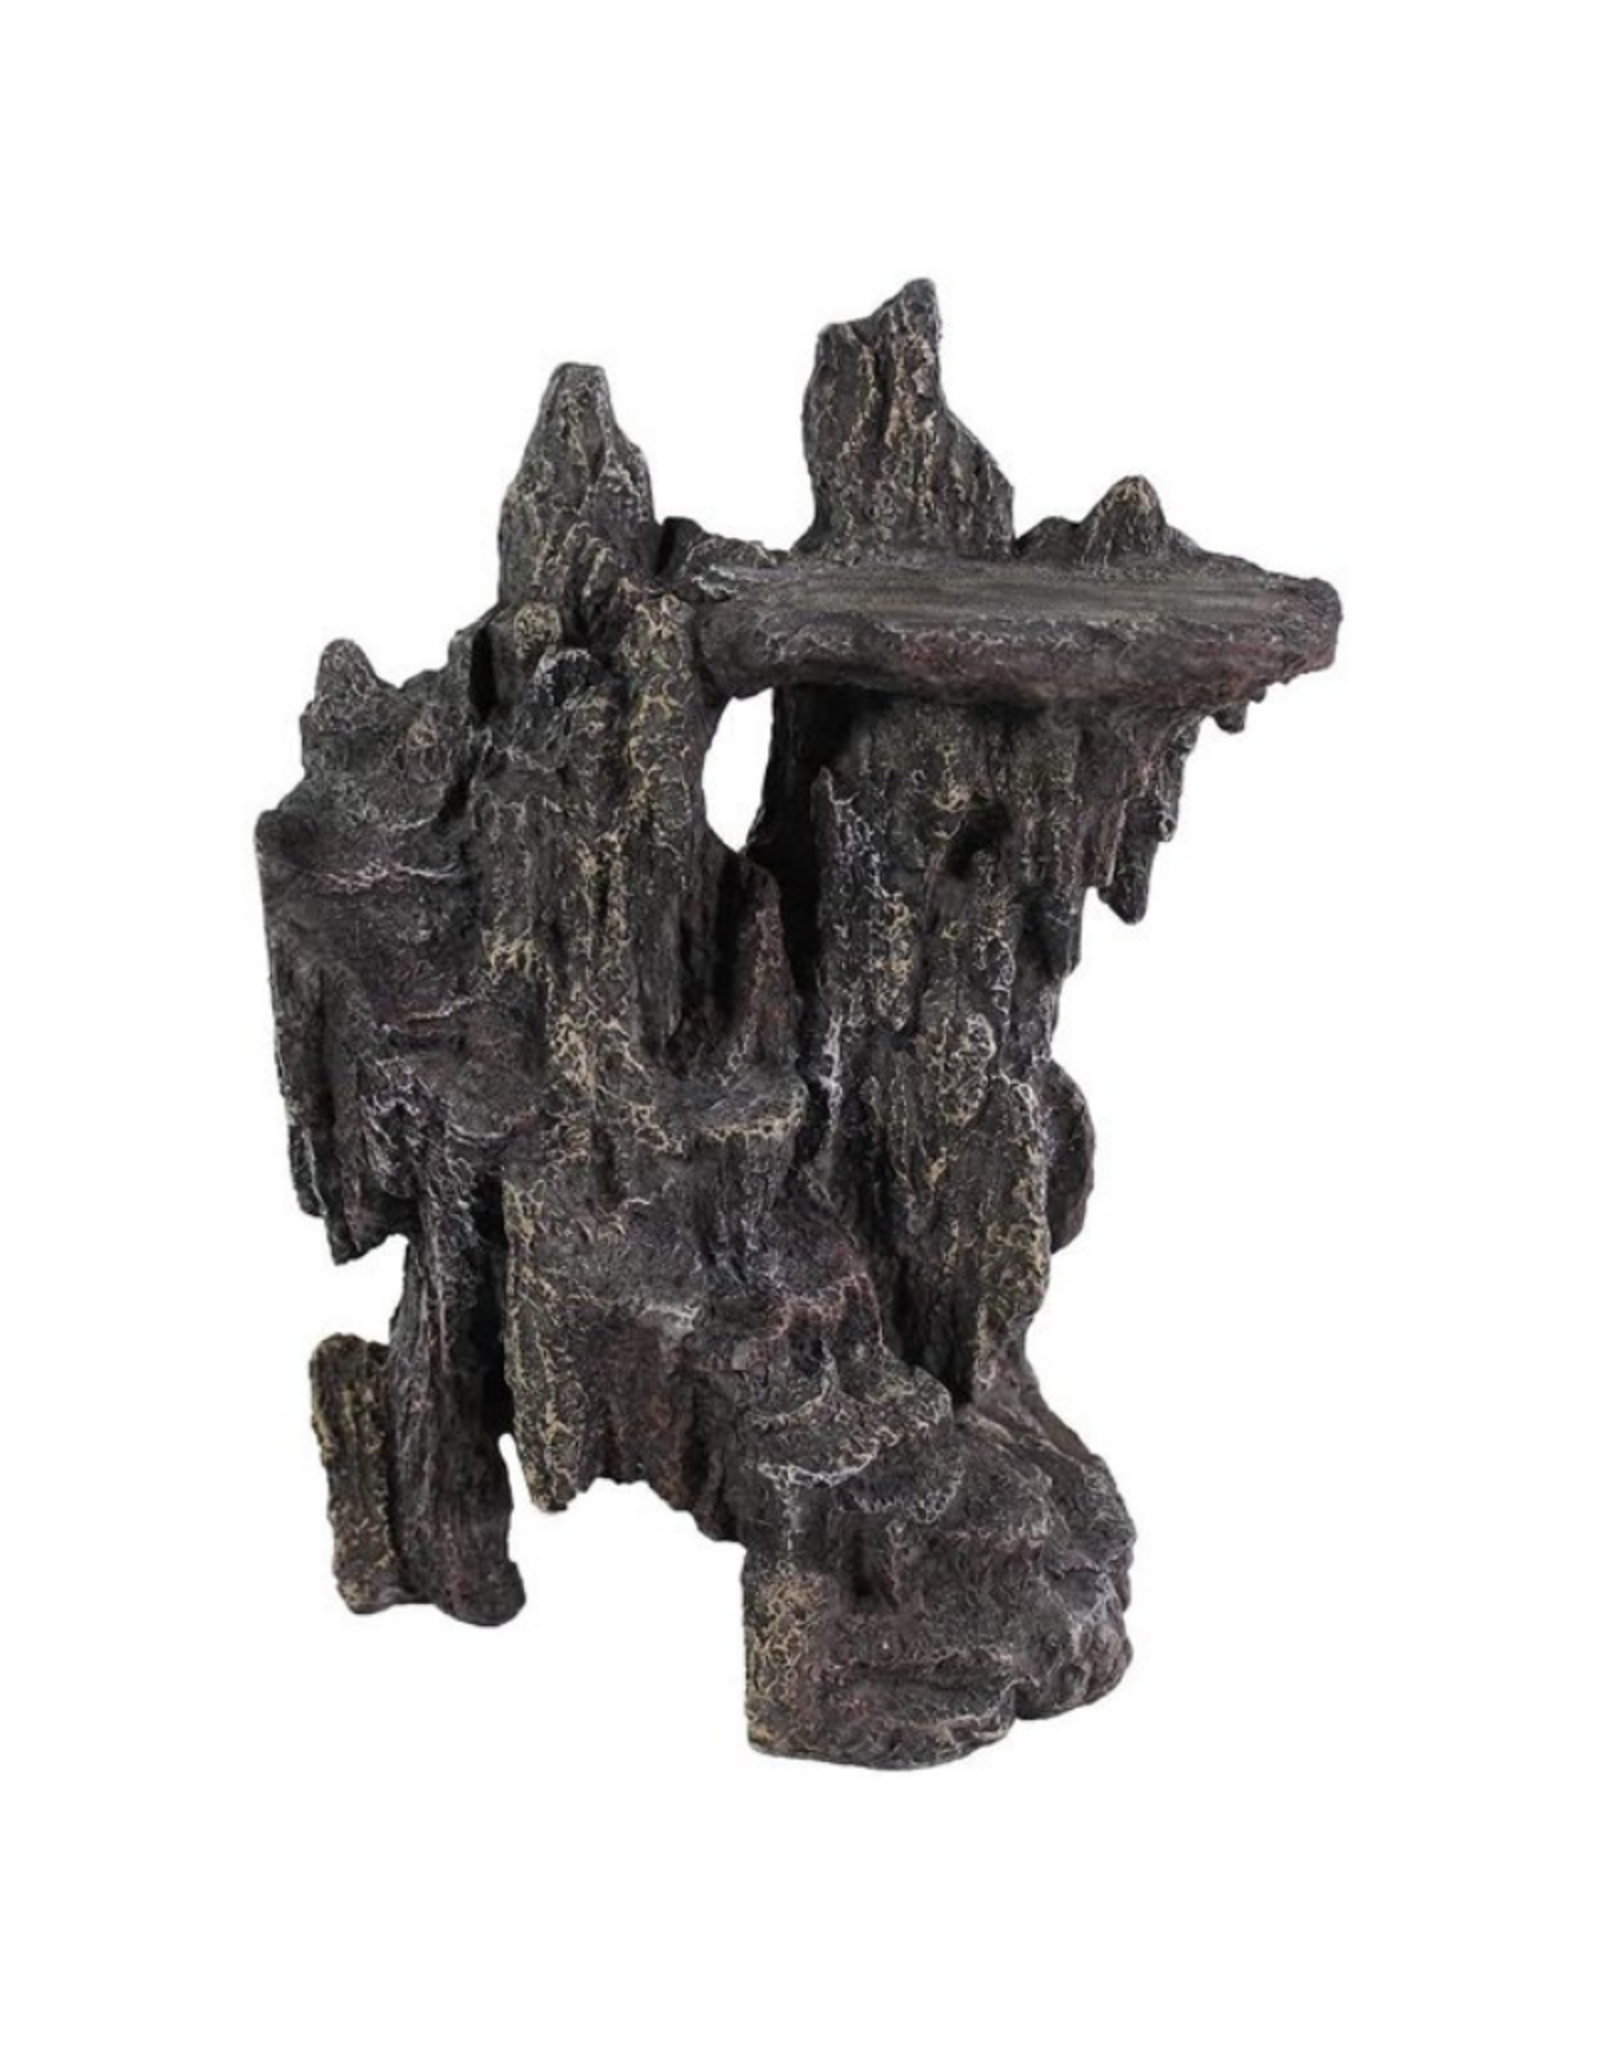 PENN-PLAX REPTOLOGY- REP189- CAVE HIDEOUT- 11X8.9X6.3- ROCKSCAPES WITH TEMPERATURE REGULATING LEDGE